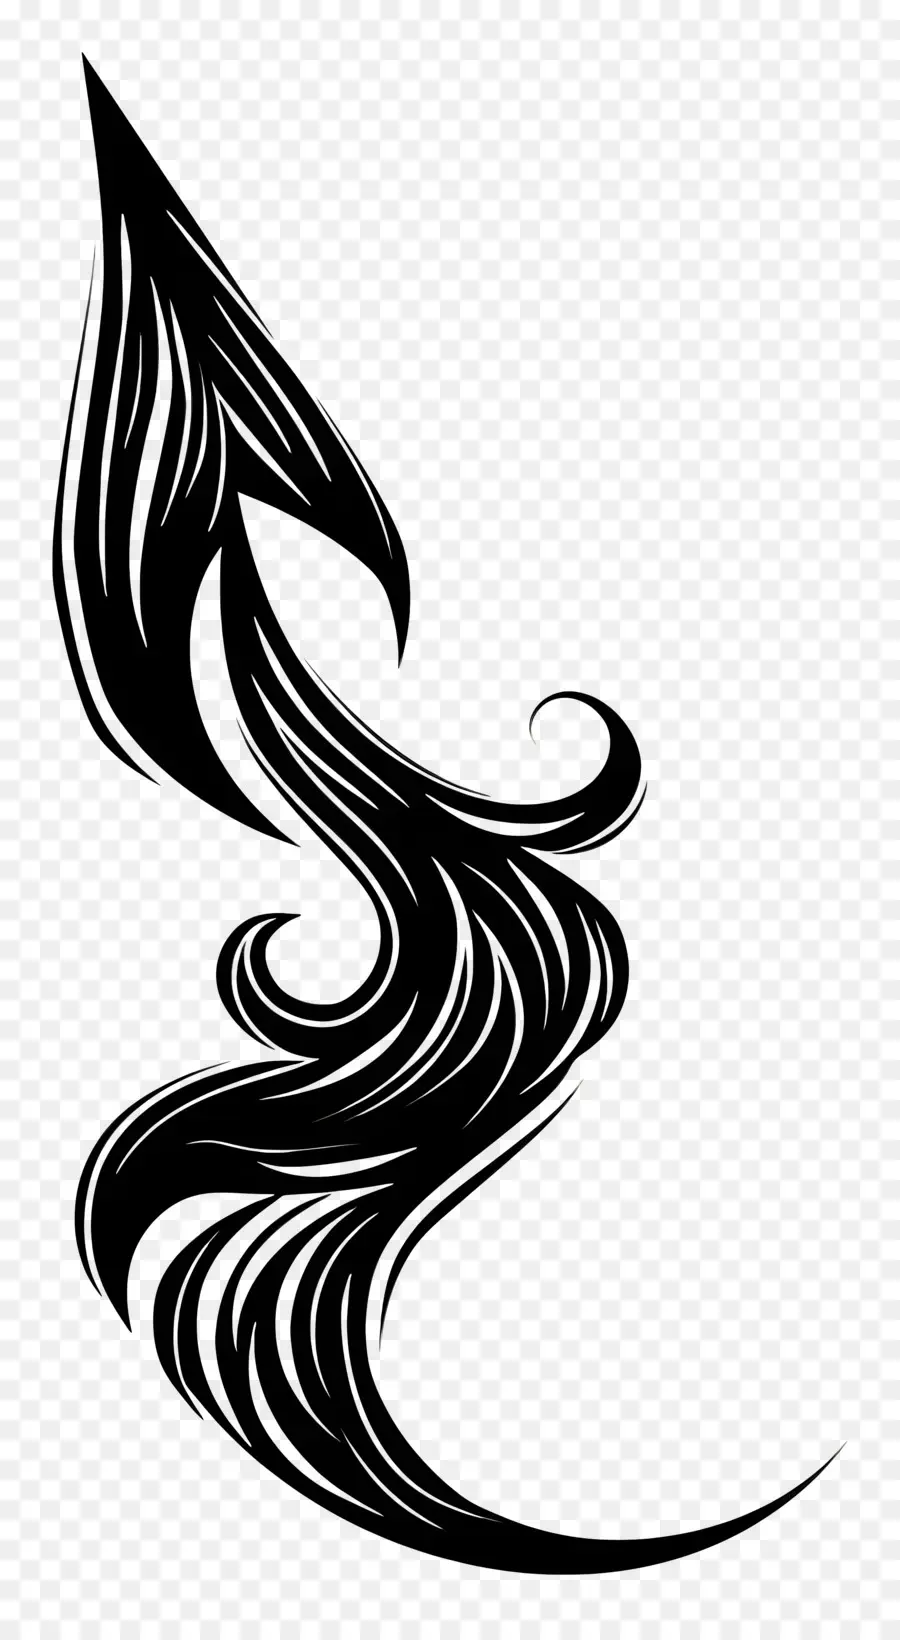 brush arrow abstract art black and white swirling lines pattern